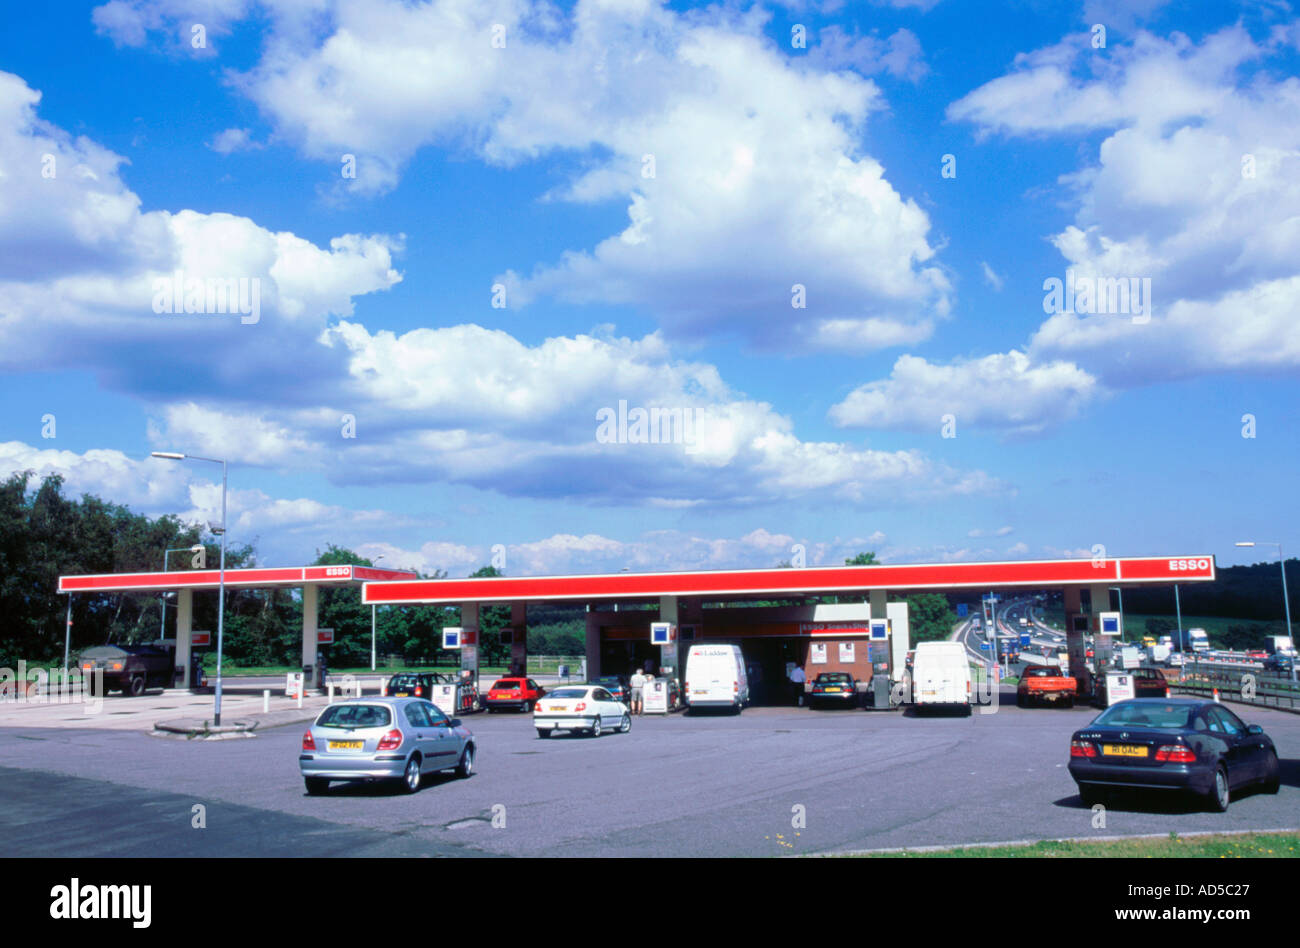 Petrol Station at Rownhams Services on M27 Motorway Stock Photo